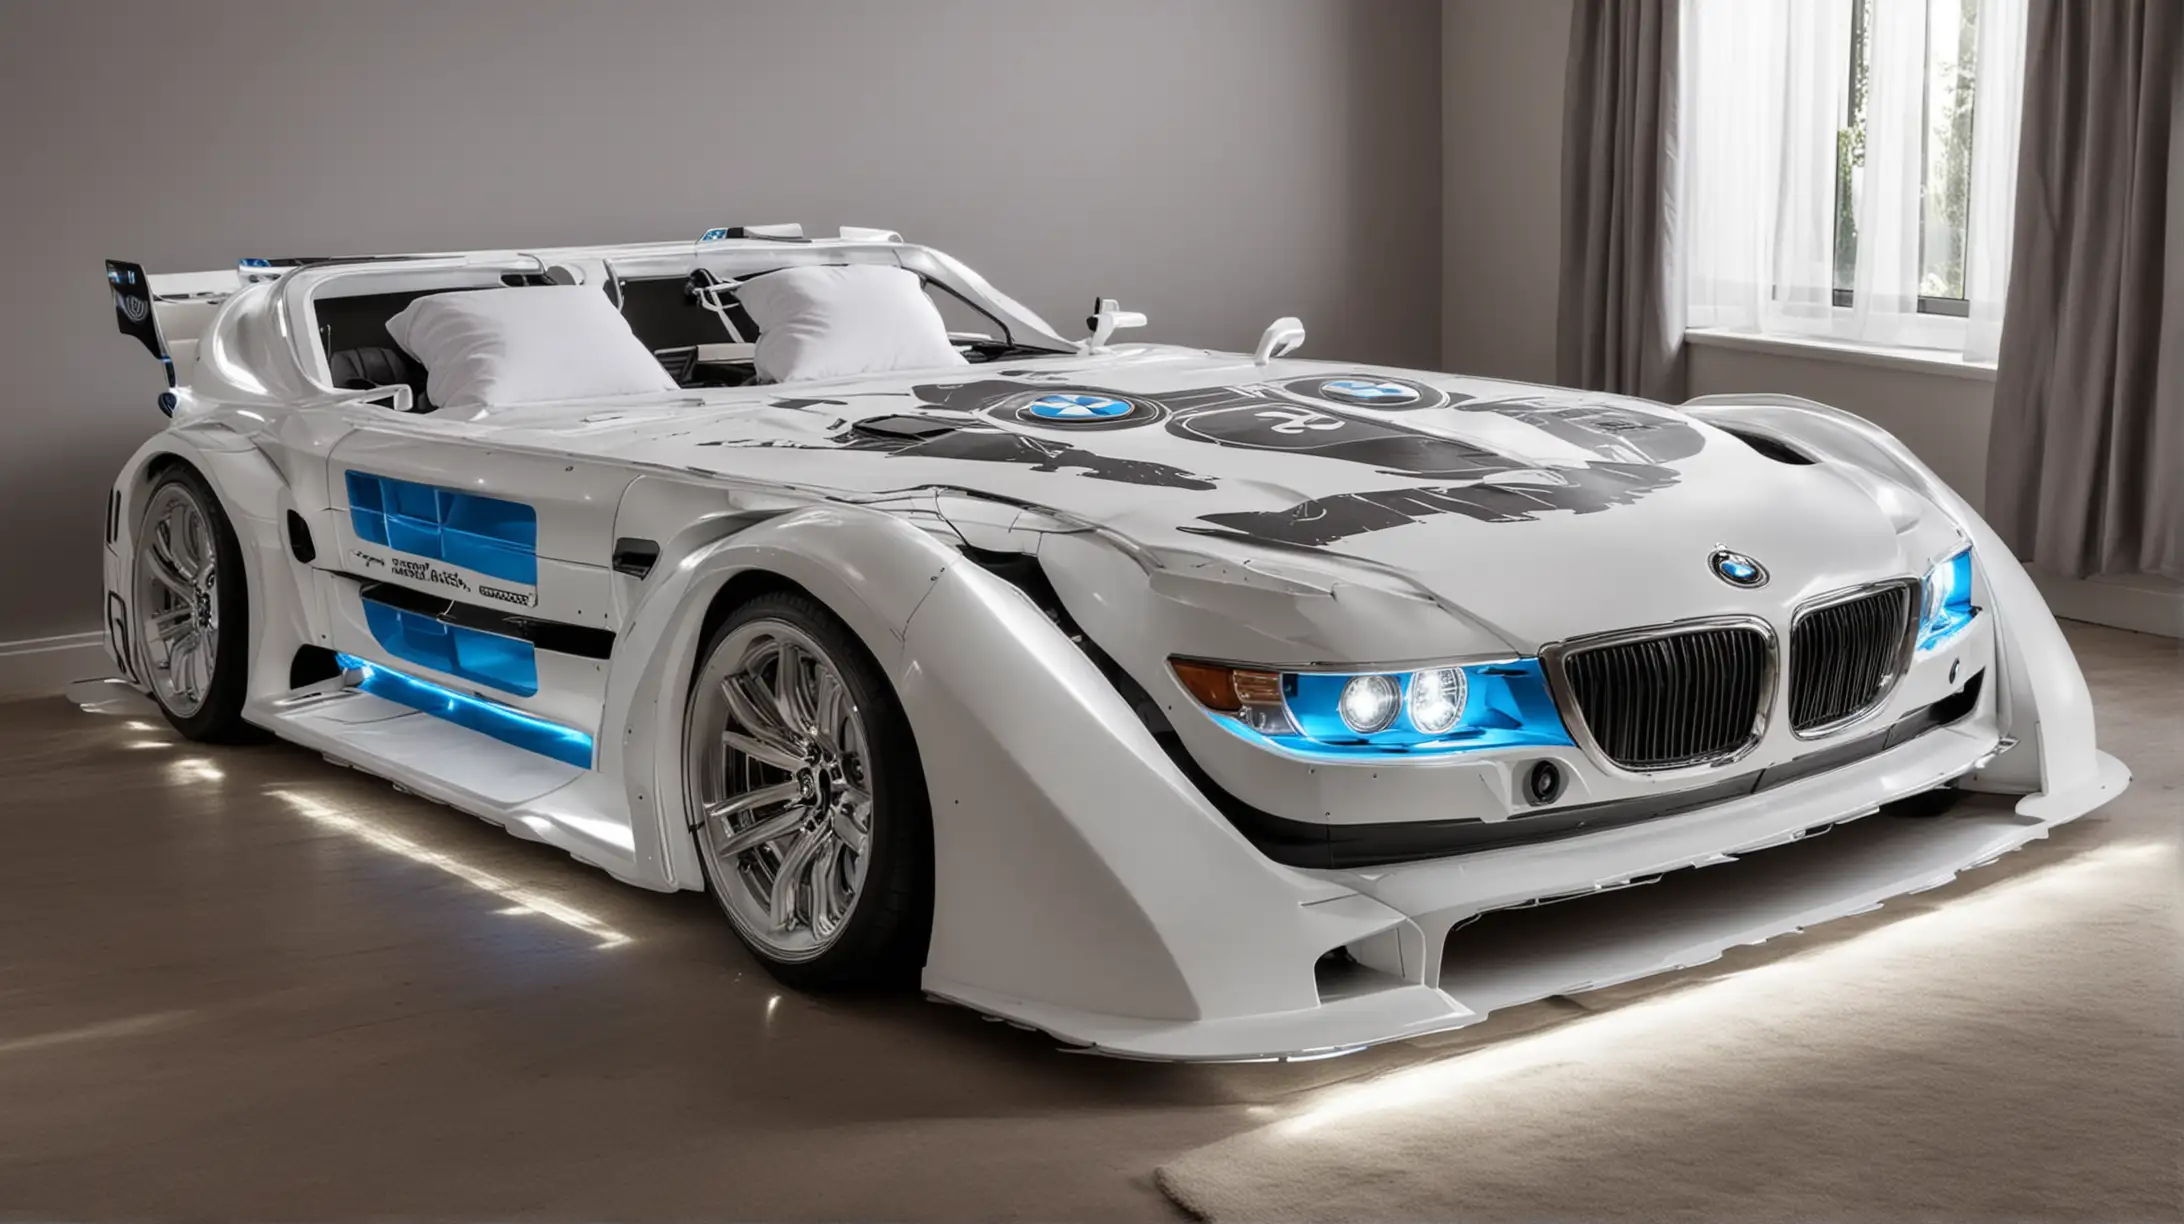 Luxurious BMW CarShaped Double Bed with Headlights and Graphics